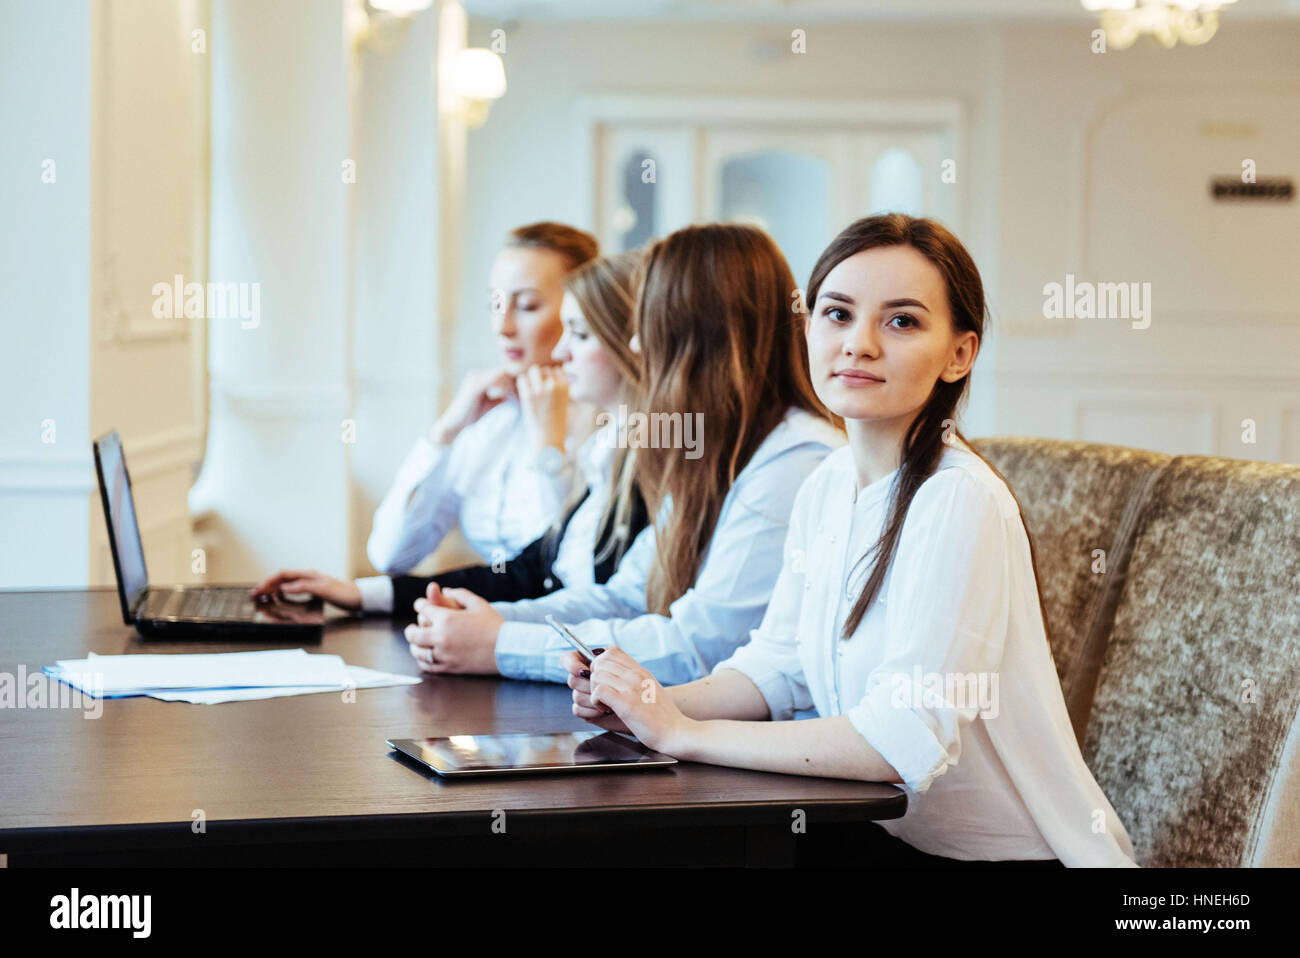 Students with laptops and tablet Stock Photo